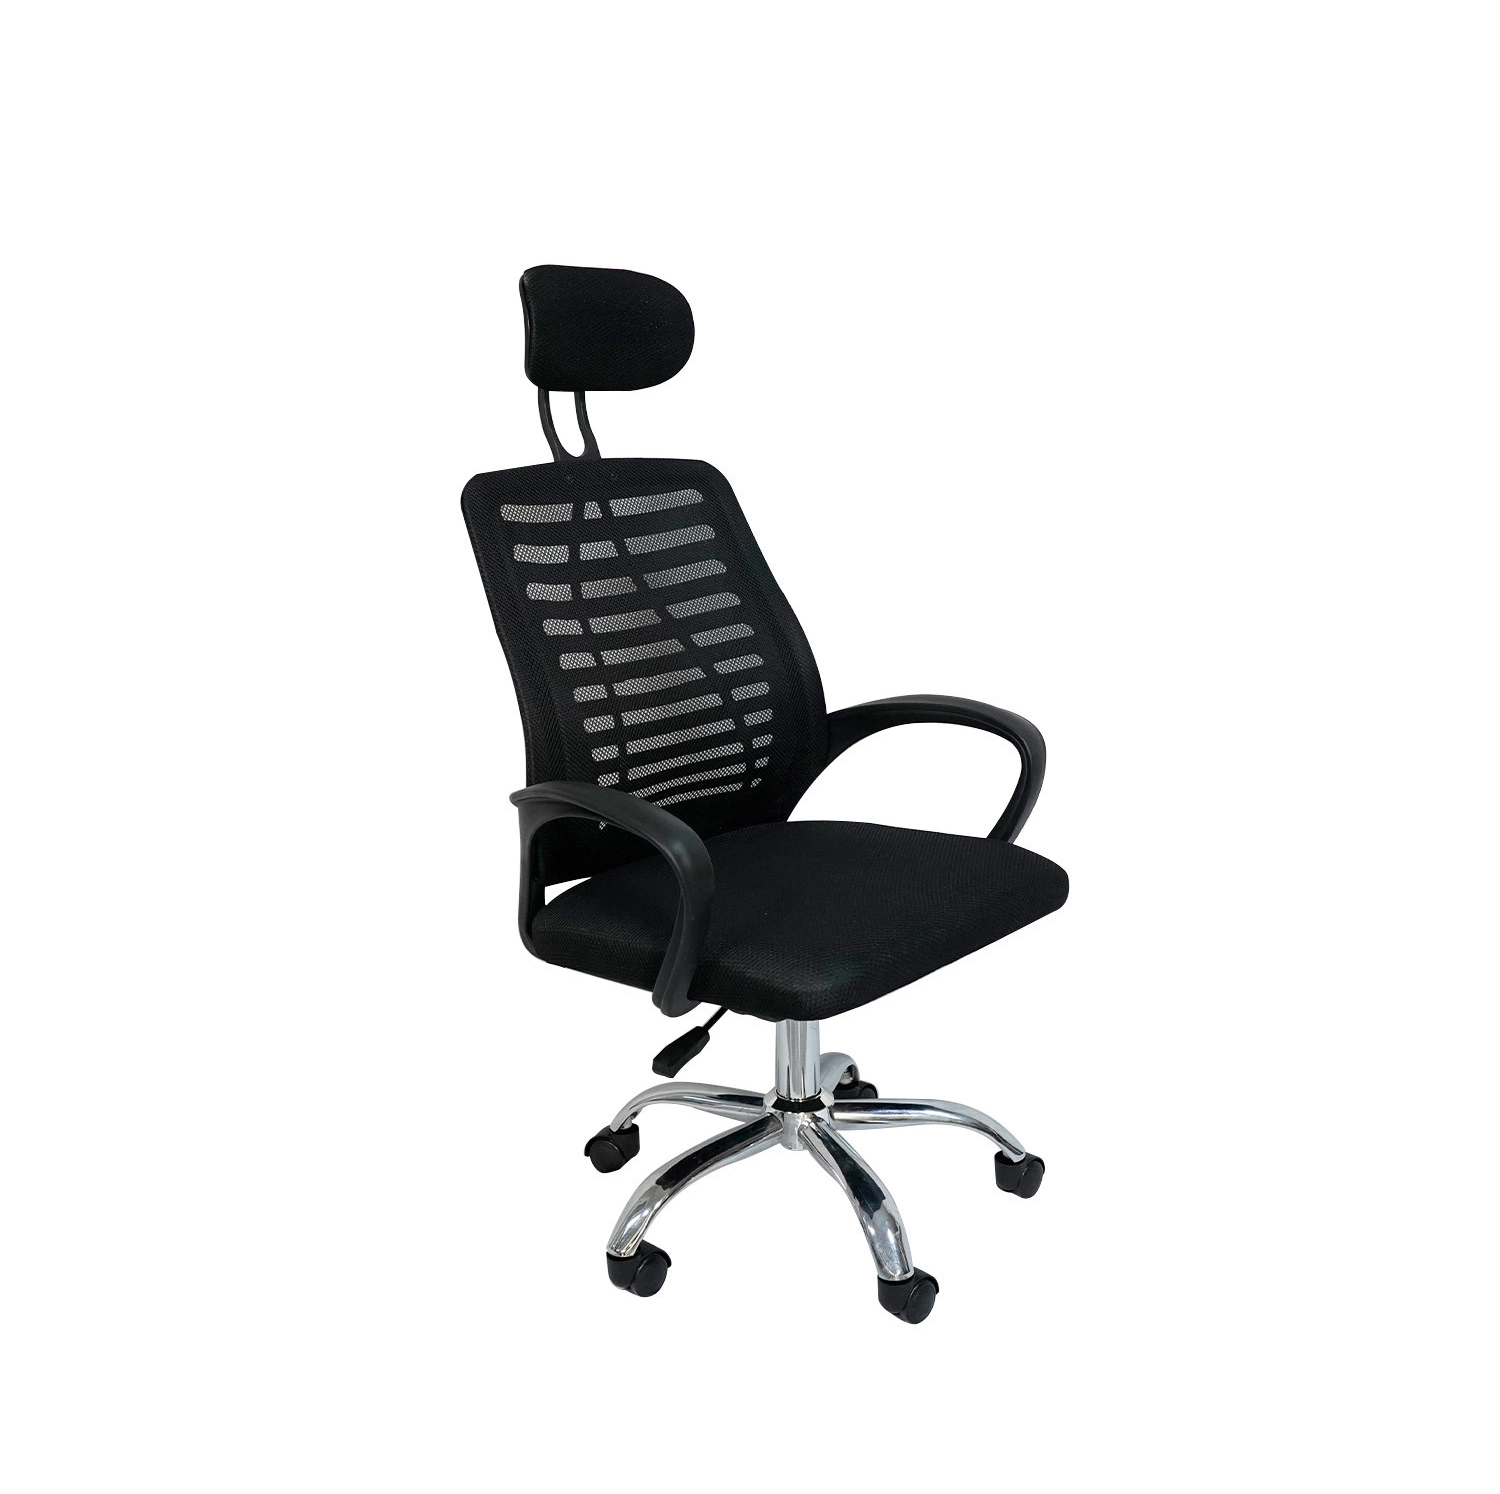 Wholesale Modern Indoor Furniture Ergonomic Executive Office Chair Swivel Adjustable Gaming Chairs